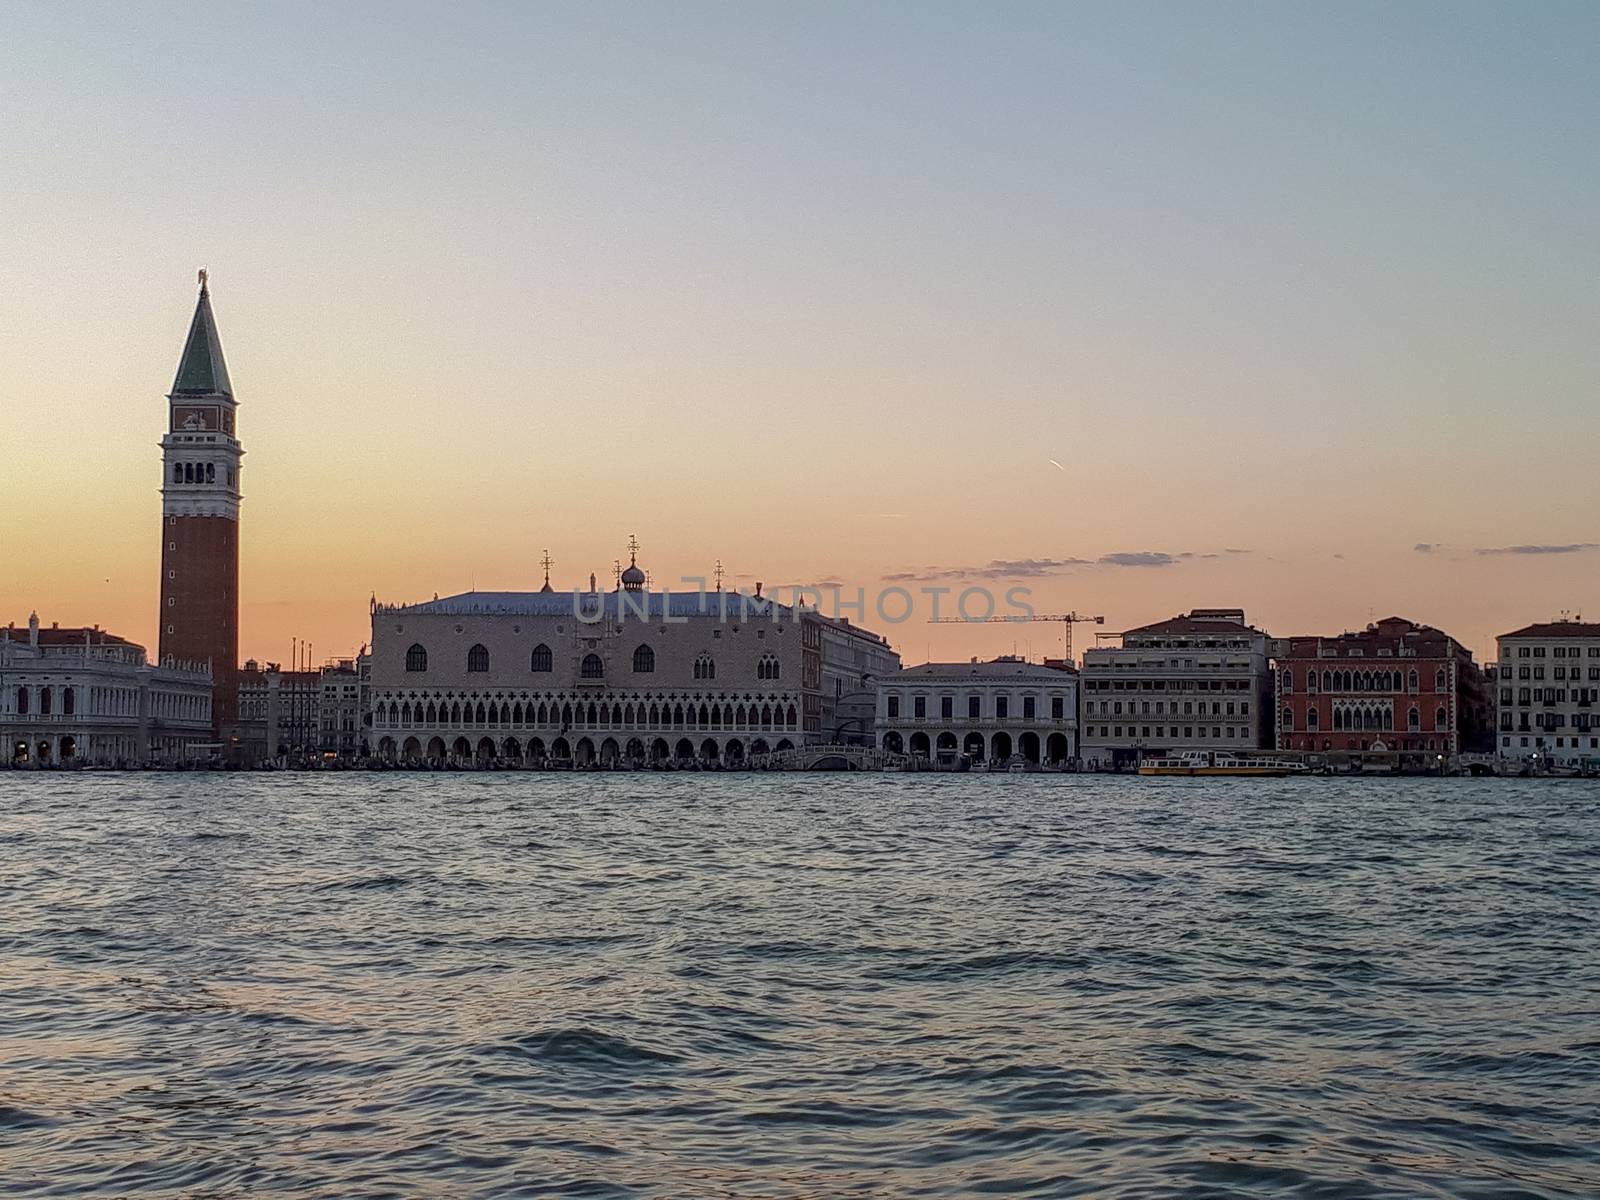 sunset in venice from the boat by Tevion25